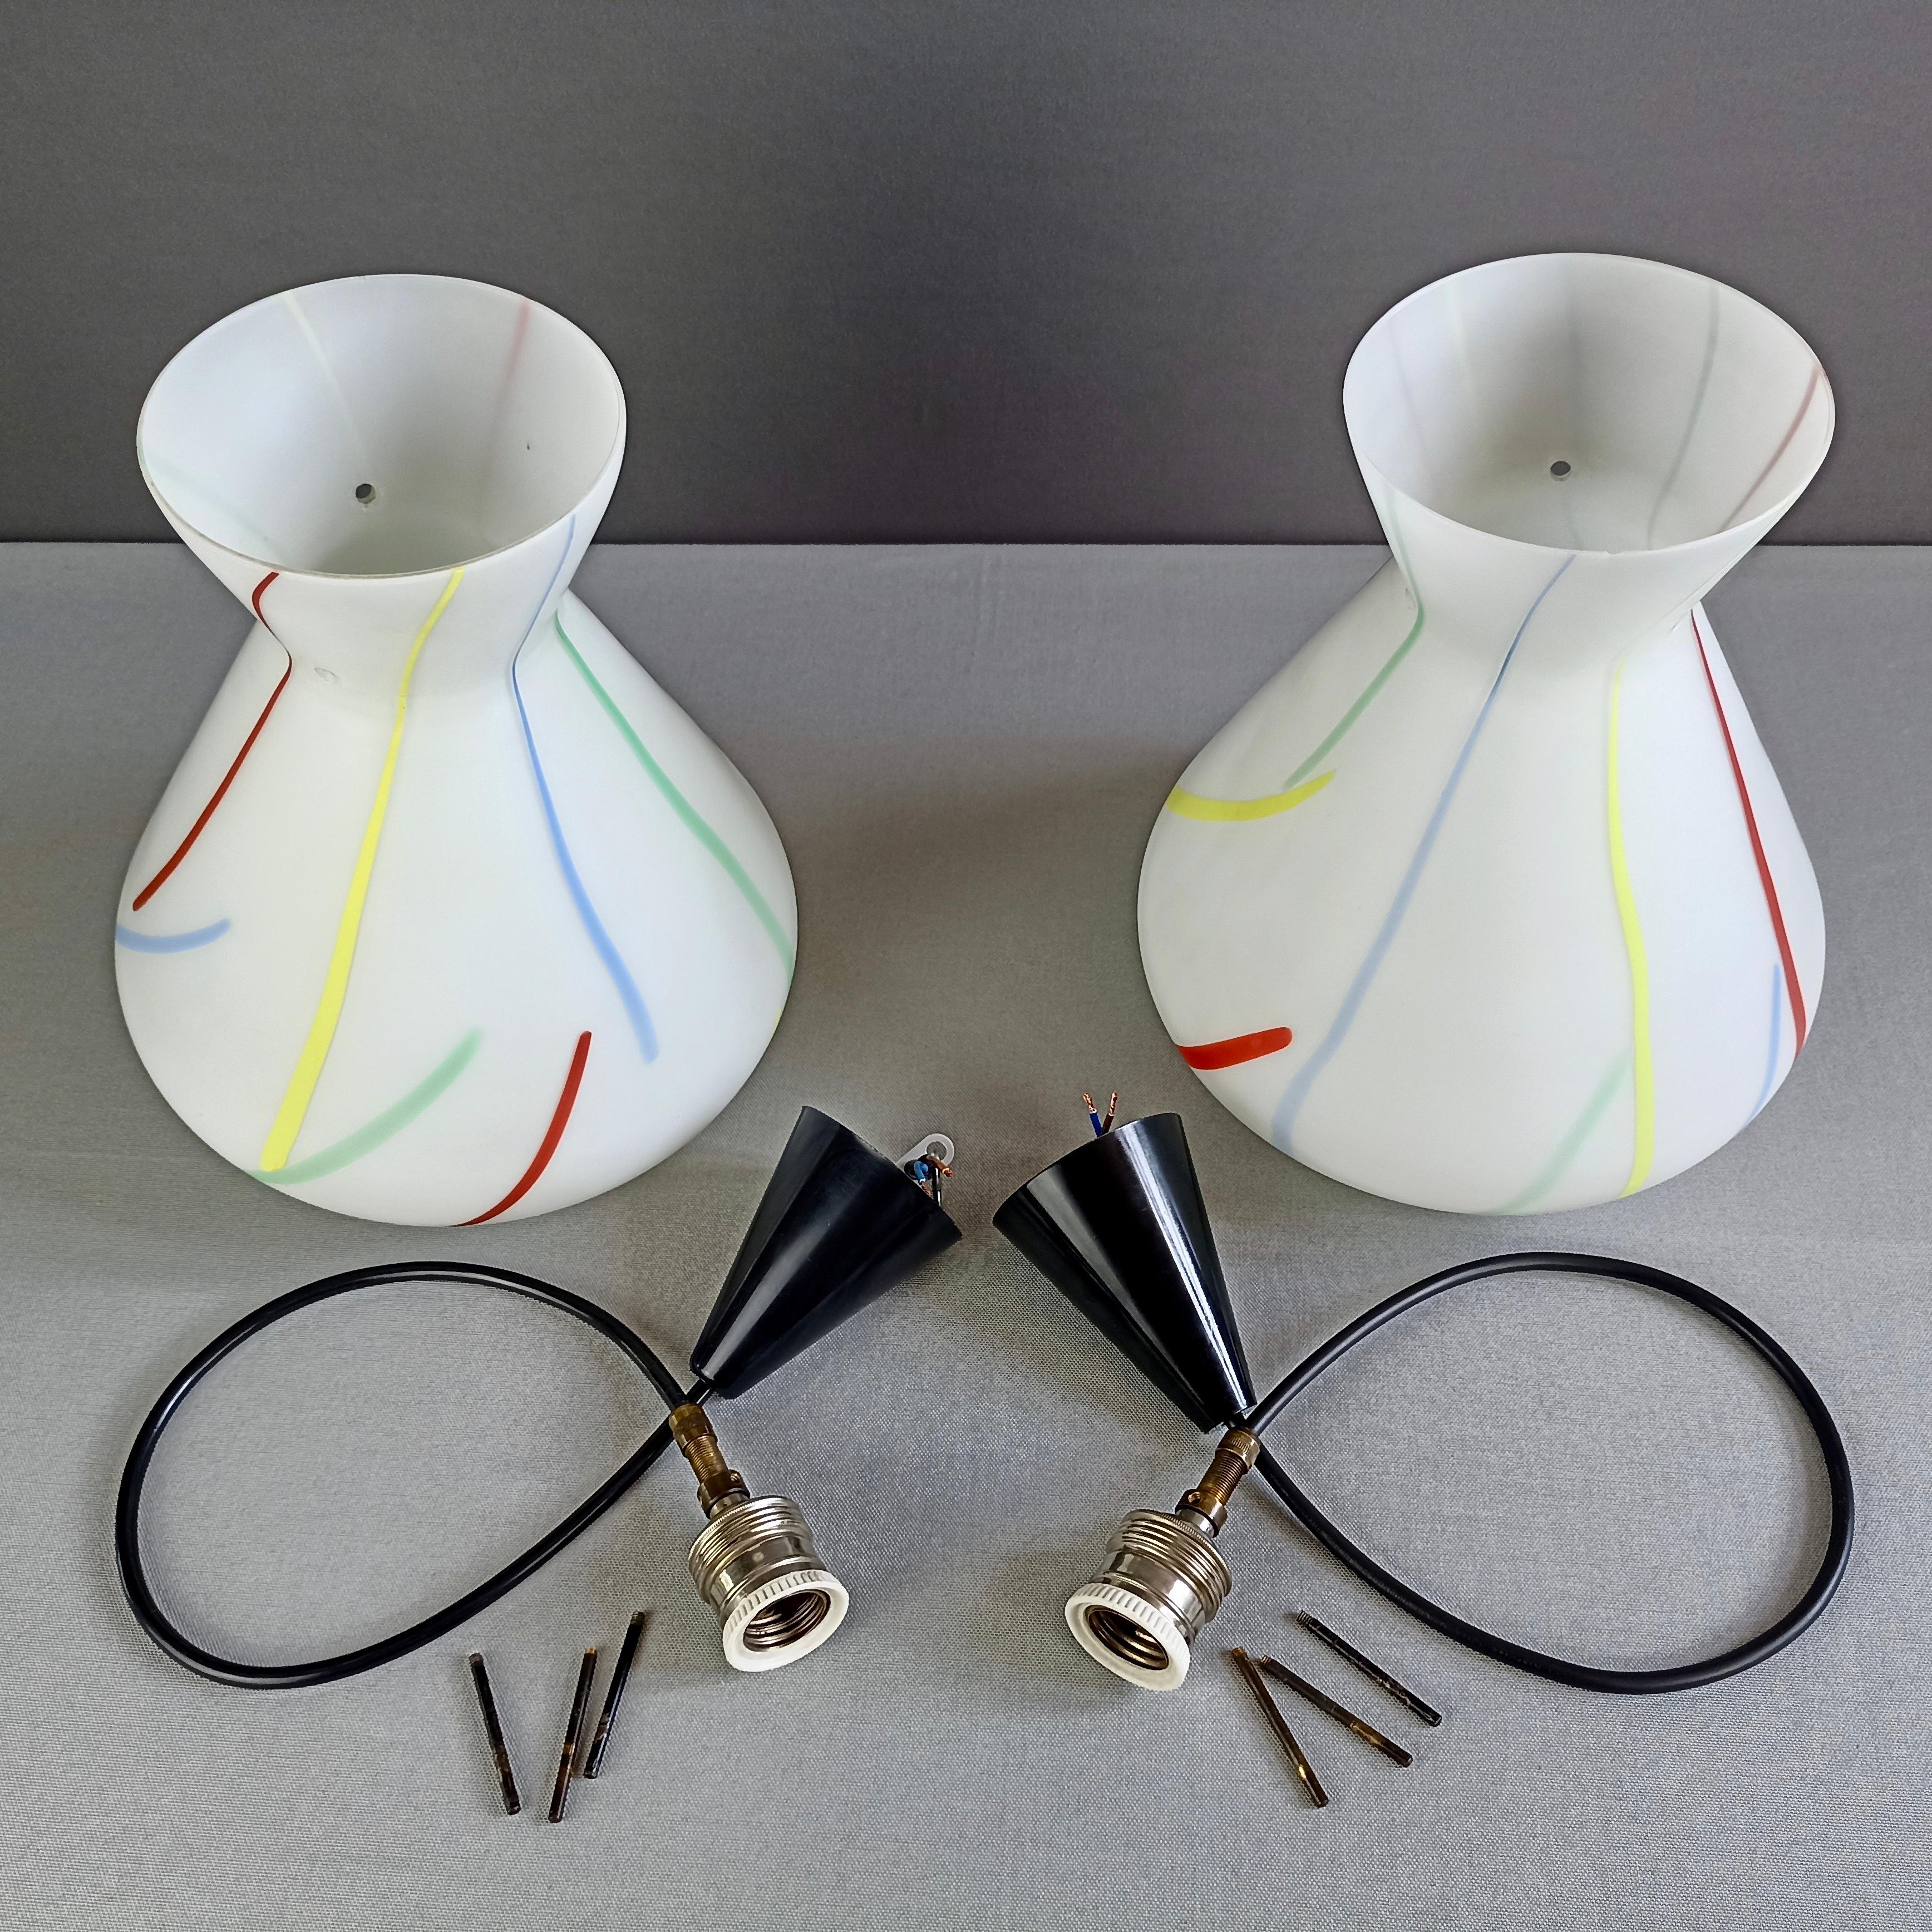 1950s Stilnovo Style Multi-Color Opaline Glass One-Light Pendant Lamps. A pair. For Sale 4